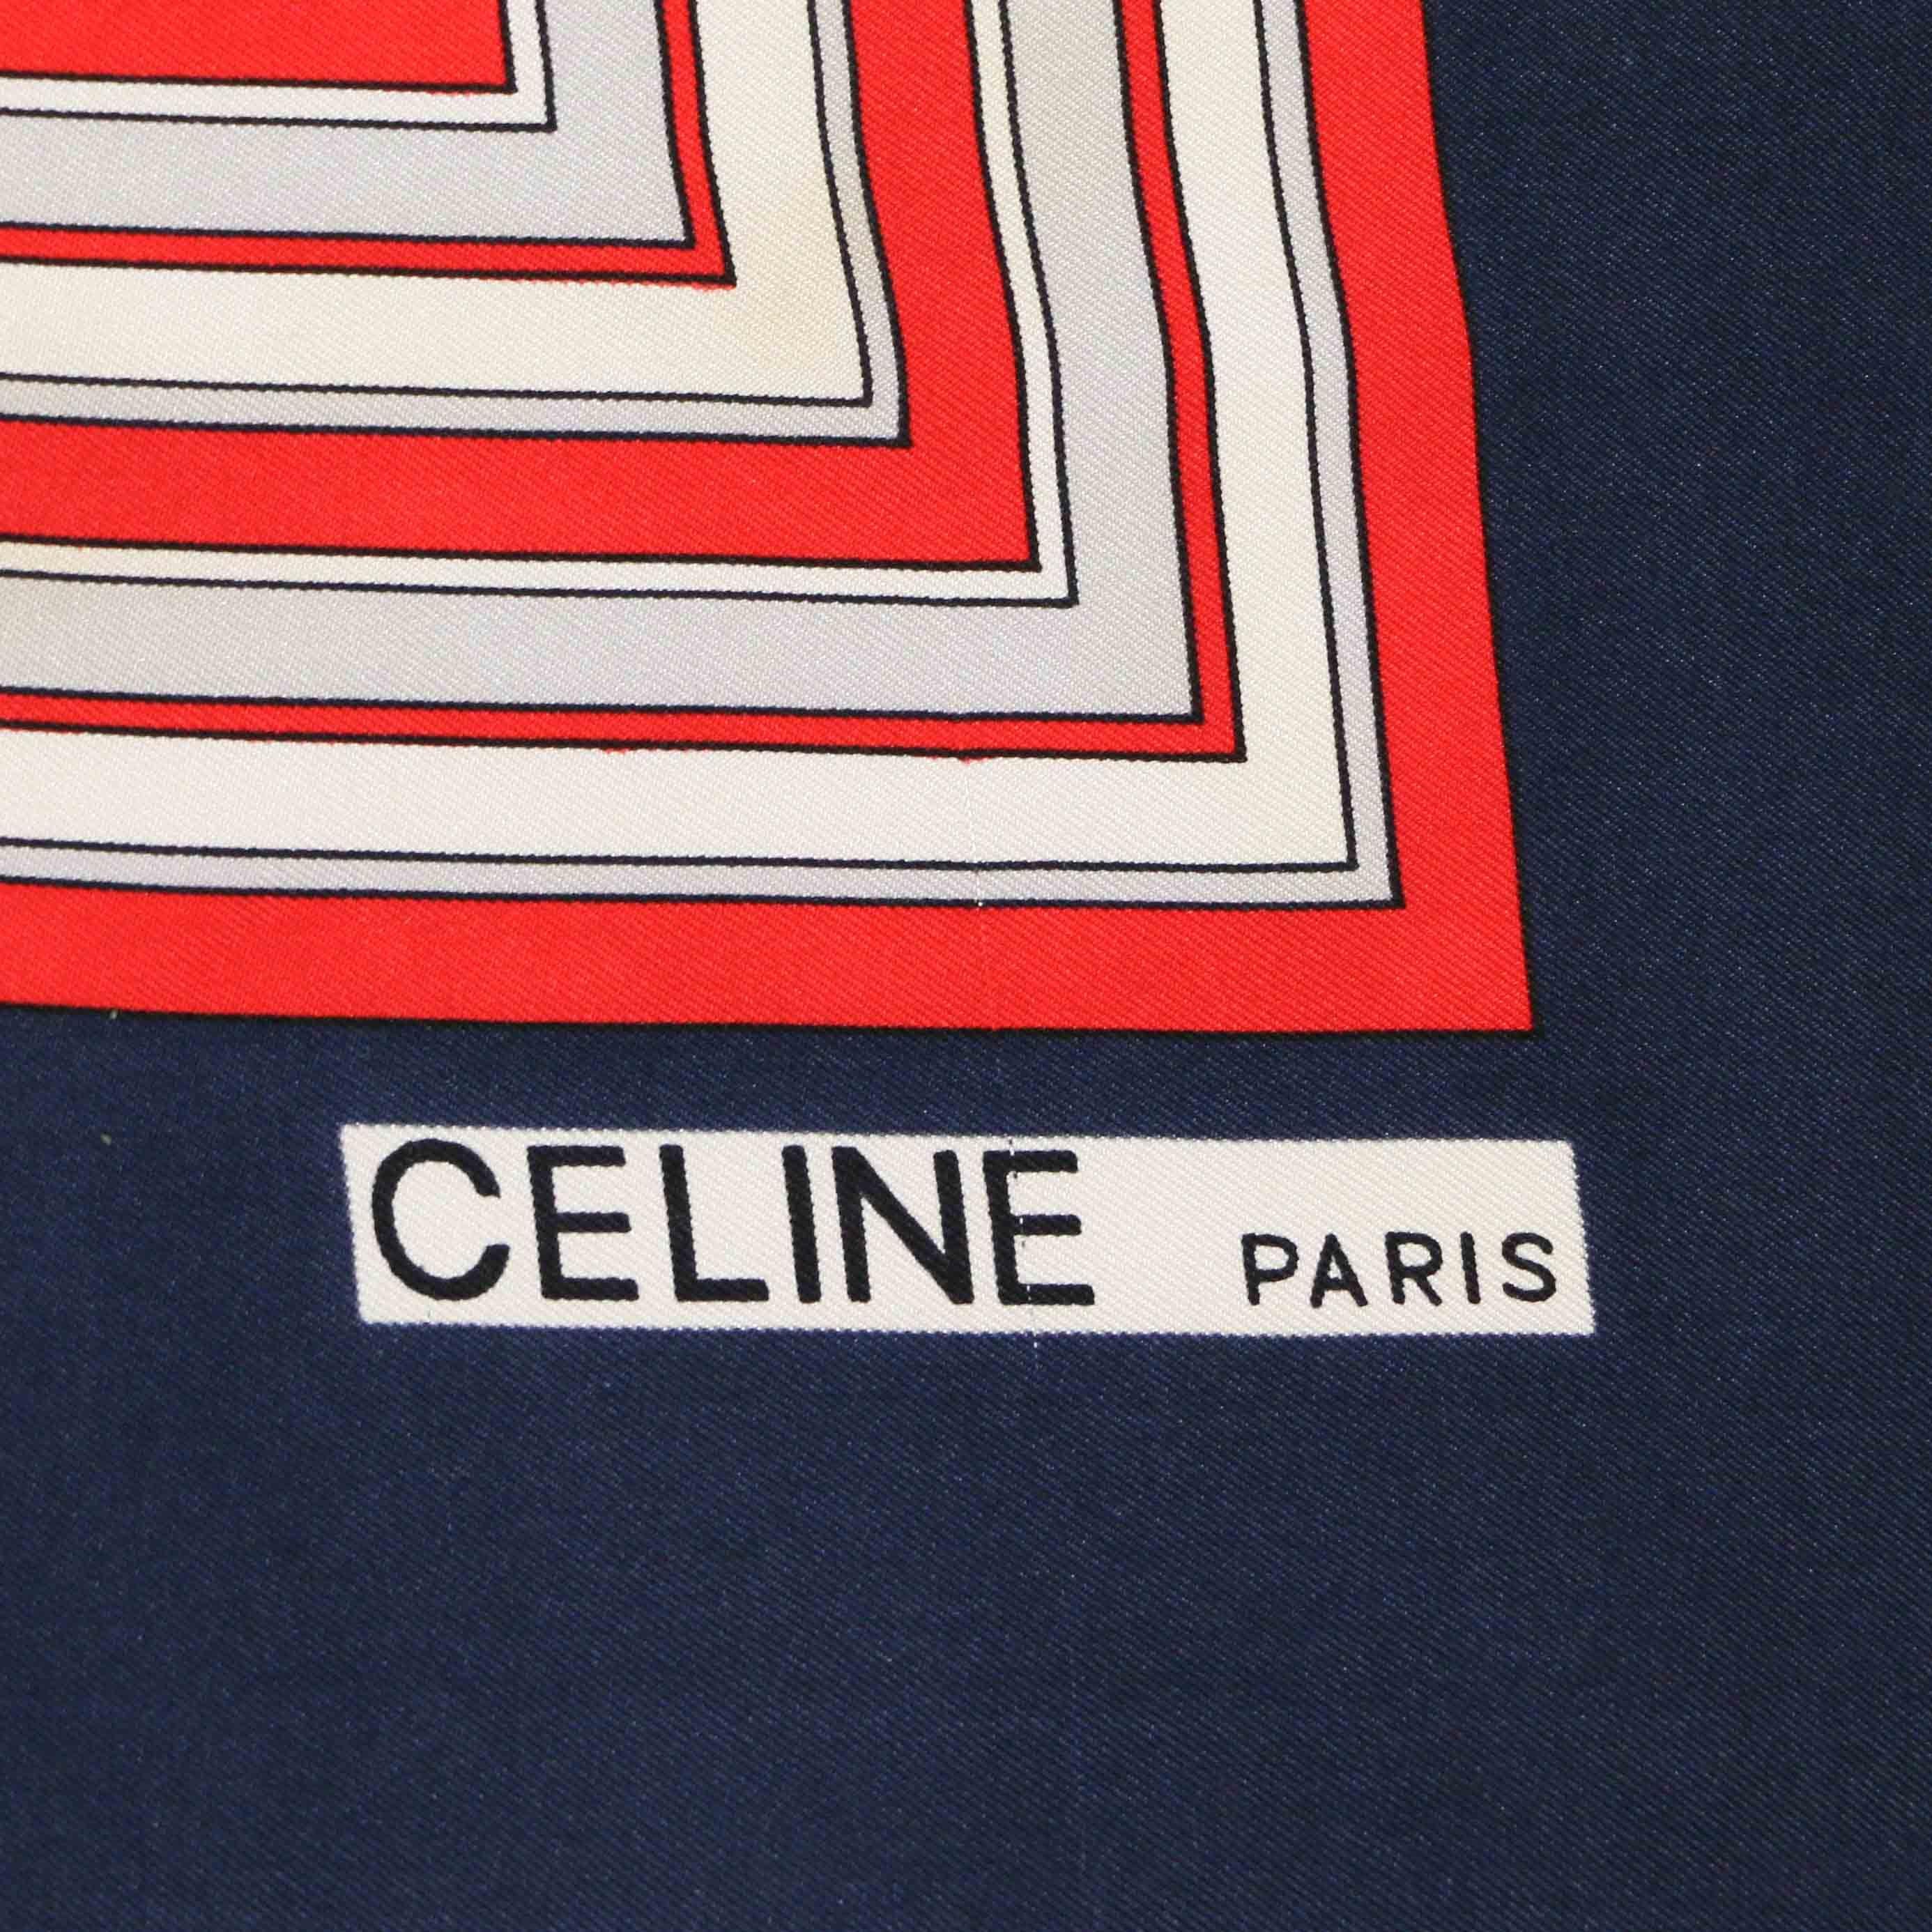 Beautiful CELINE square in blue, white, red silk
Condition: good
Material: silk
Color: blue, white, red, gray
Dimensions: 86 x 86 cm
Details: good condition, as there are small stains in the center of the scarf, but they are faded and therefore not